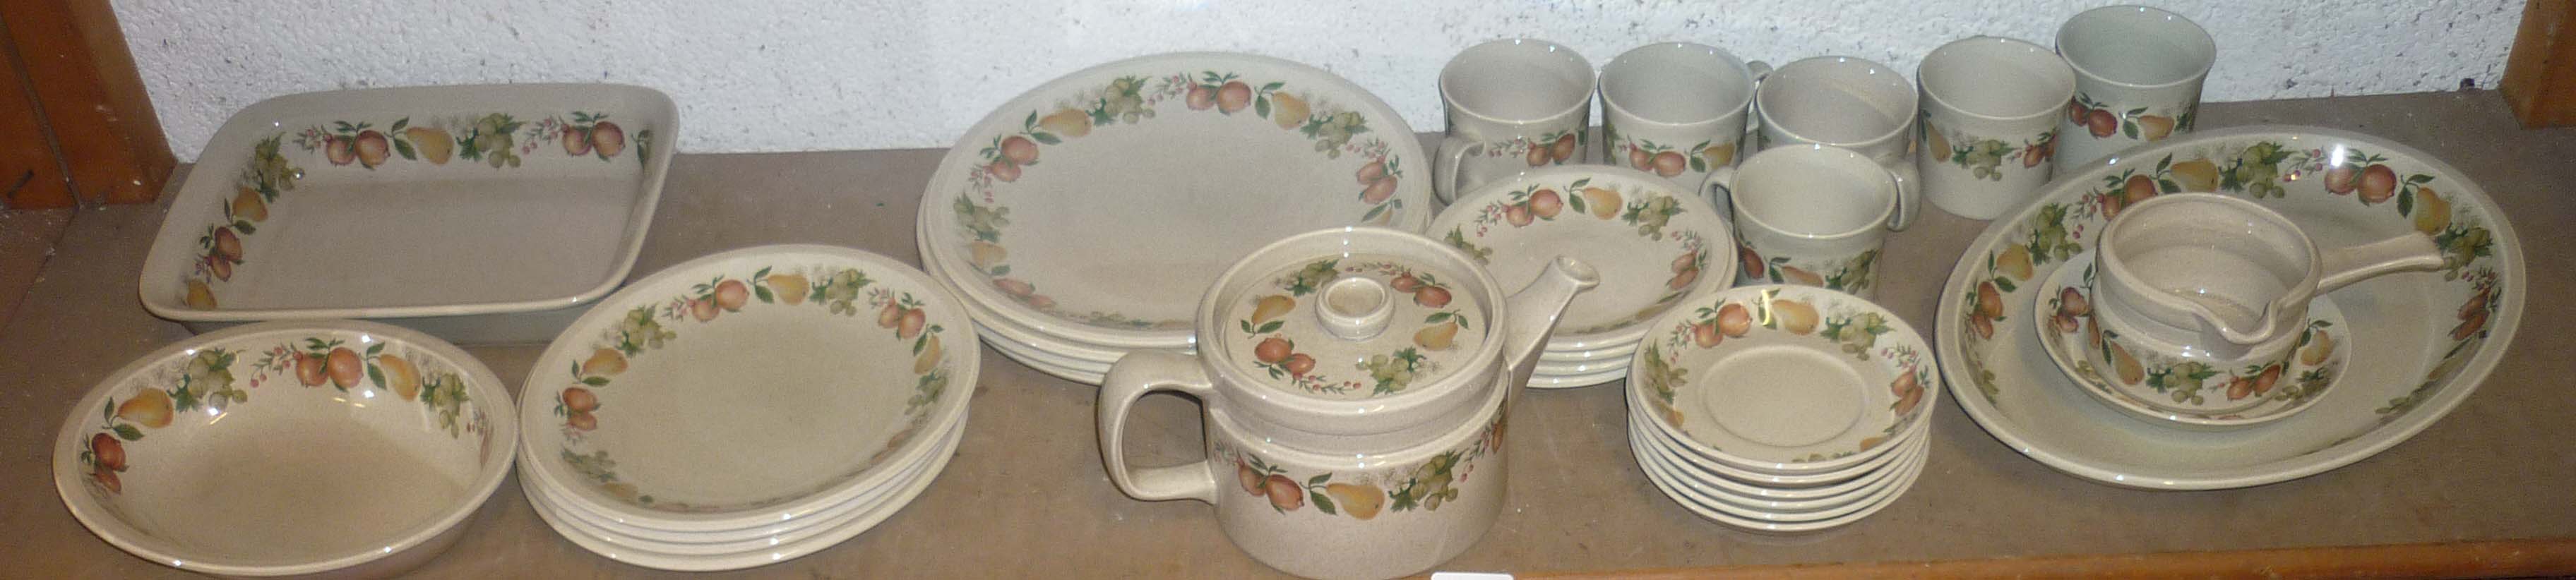 Wedgwood Quince dinner and tea tableware incl. teapot, gravy boat and meat plates